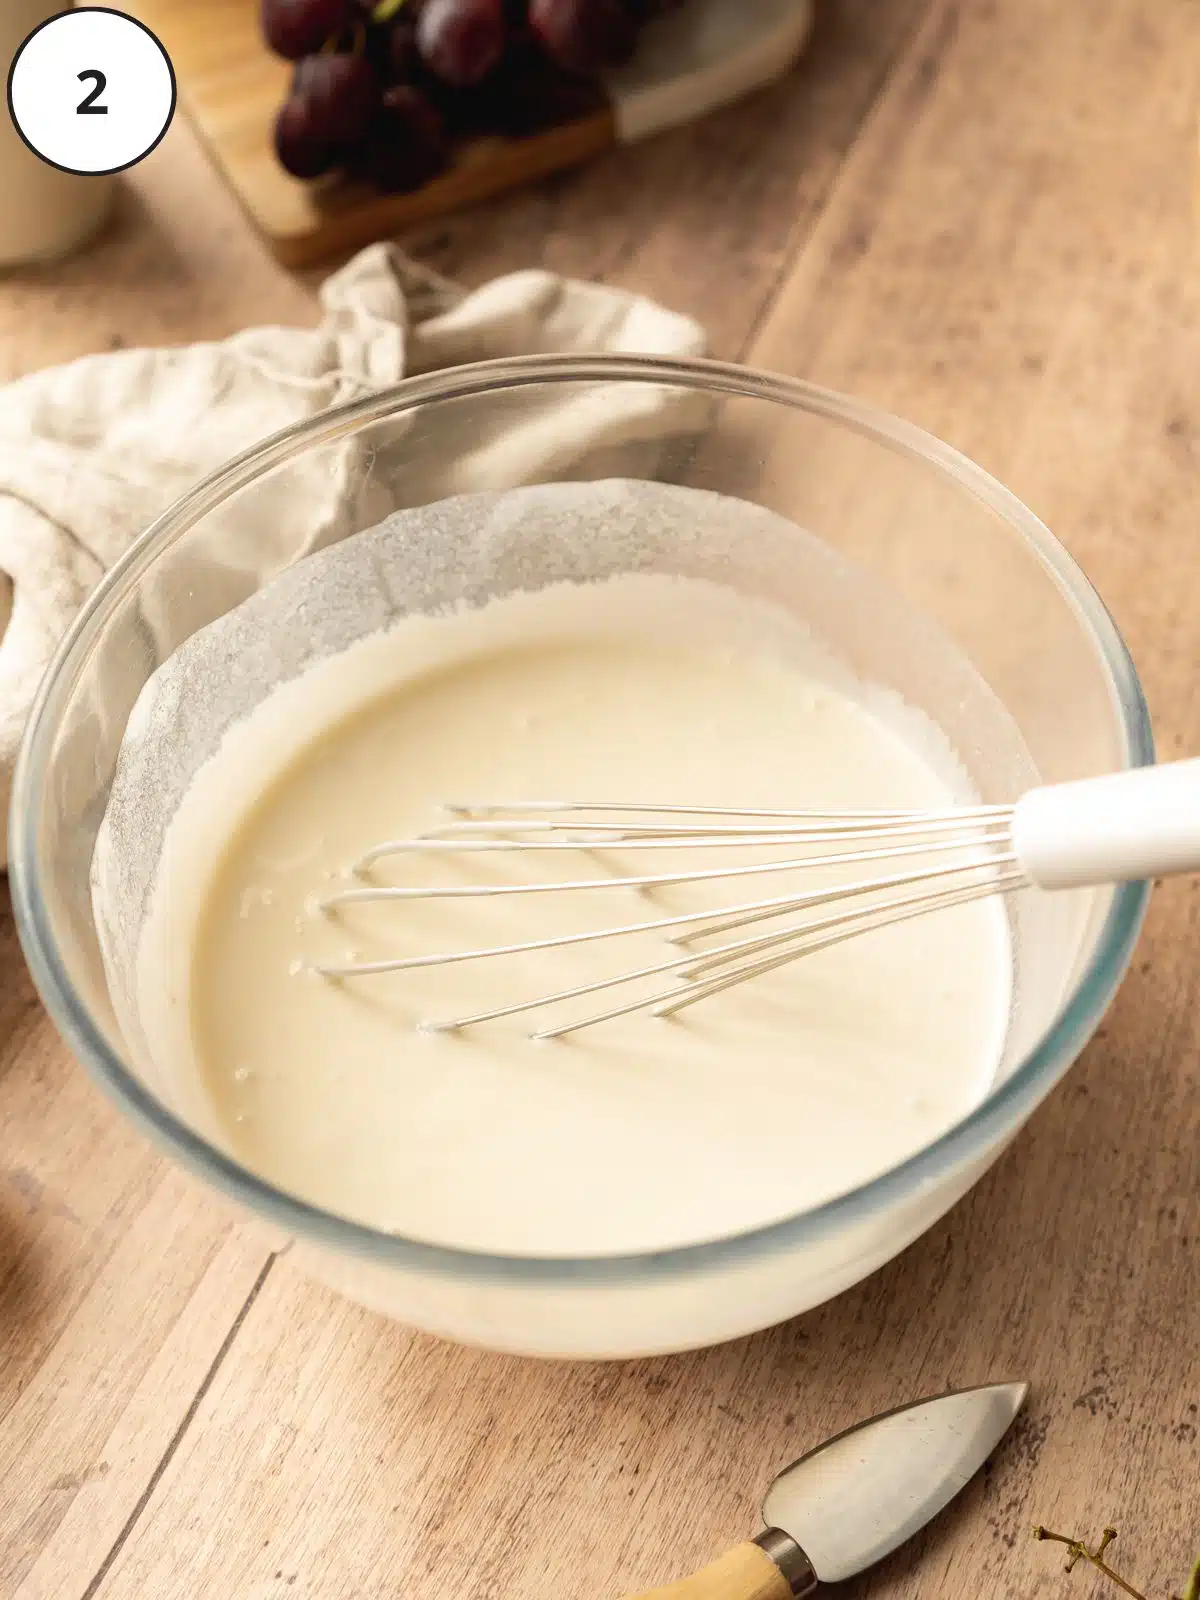 All vegan cream cheese ingredients whisked together until smooth.